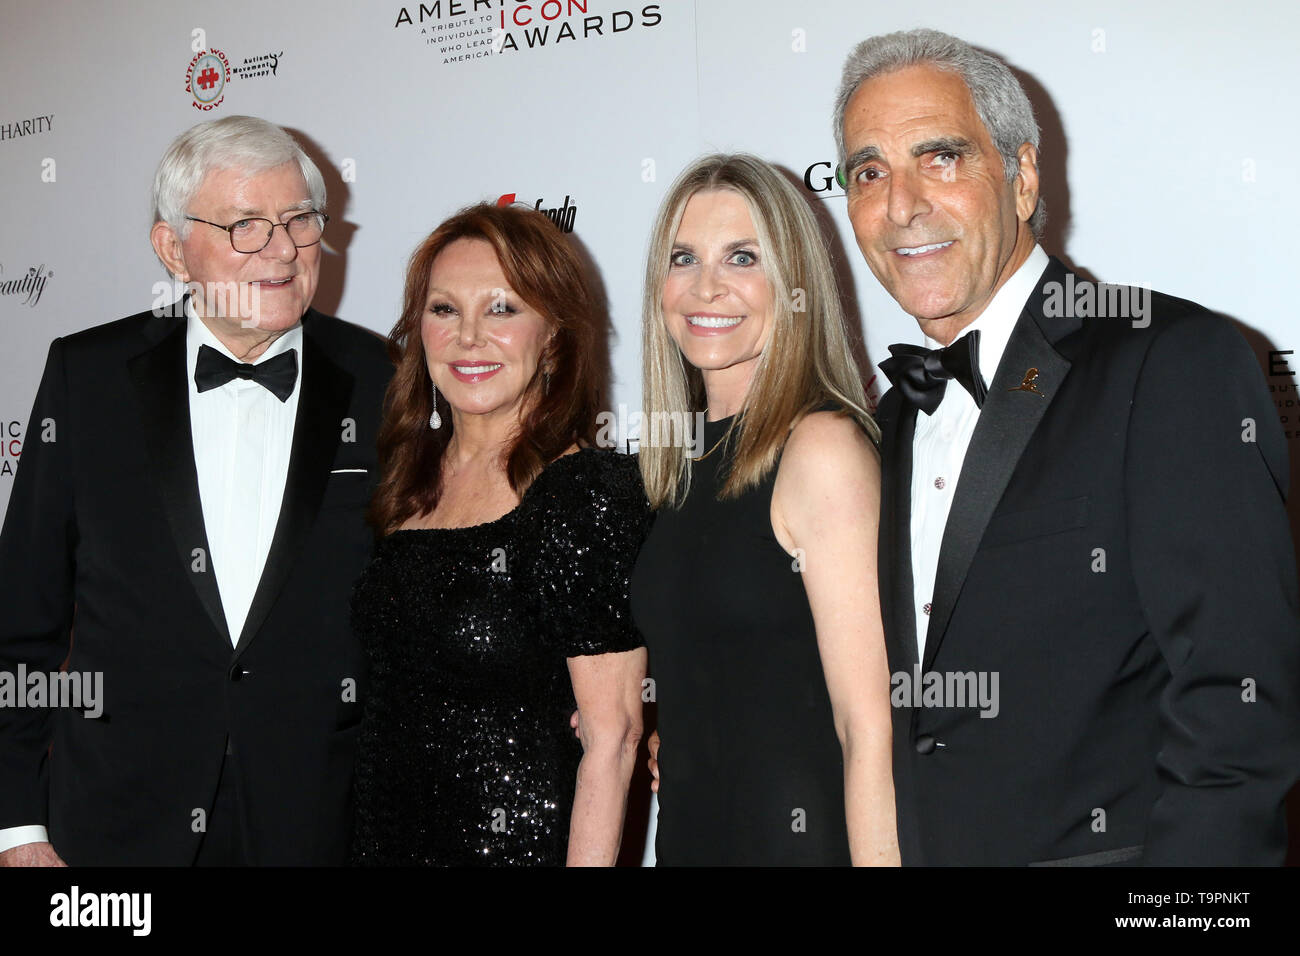 May 19, 2019 - Beverly Hills, CA, USA - LOS ANGELES - MAY 19:  Phil Donahue, Marlo Thomas, Ann Souder, Tony Thomas at the American Icon Awards at the Beverly Wilshire Hotel on May 19, 2019 in Beverly Hills, CA (Credit Image: © Kay Blake/ZUMA Wire) Stock Photo